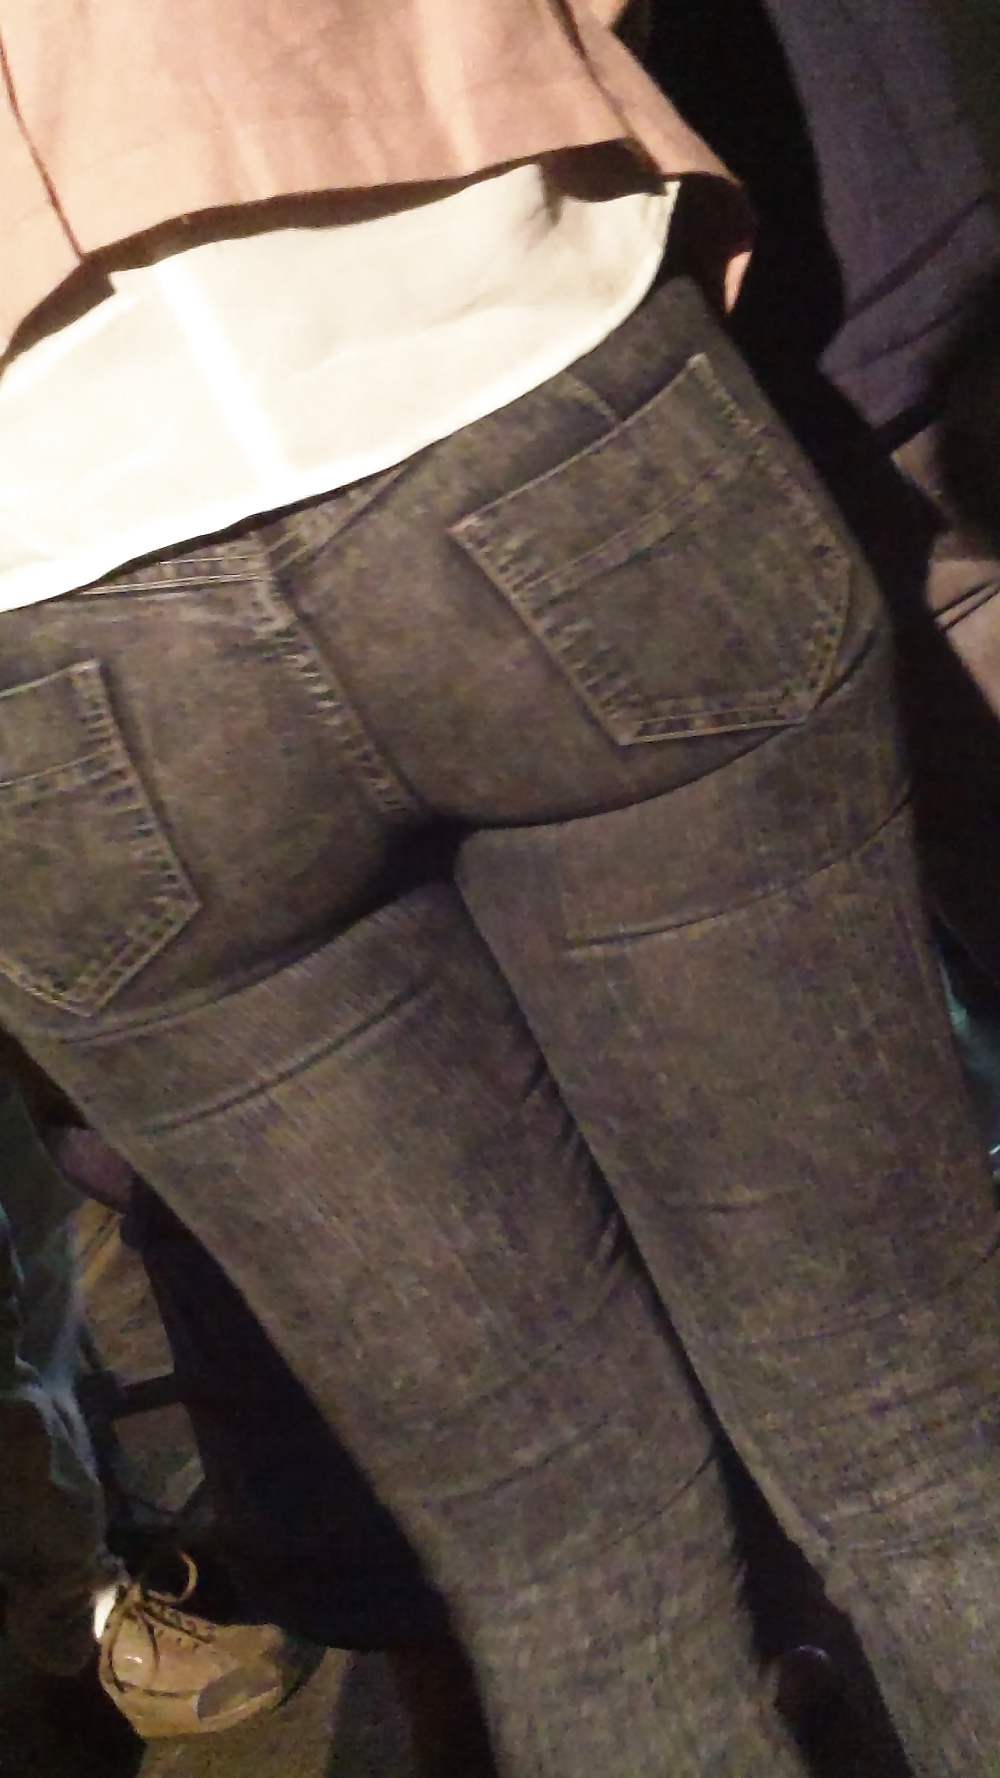 Tight teen butts & ass in jeans up close  #20661026